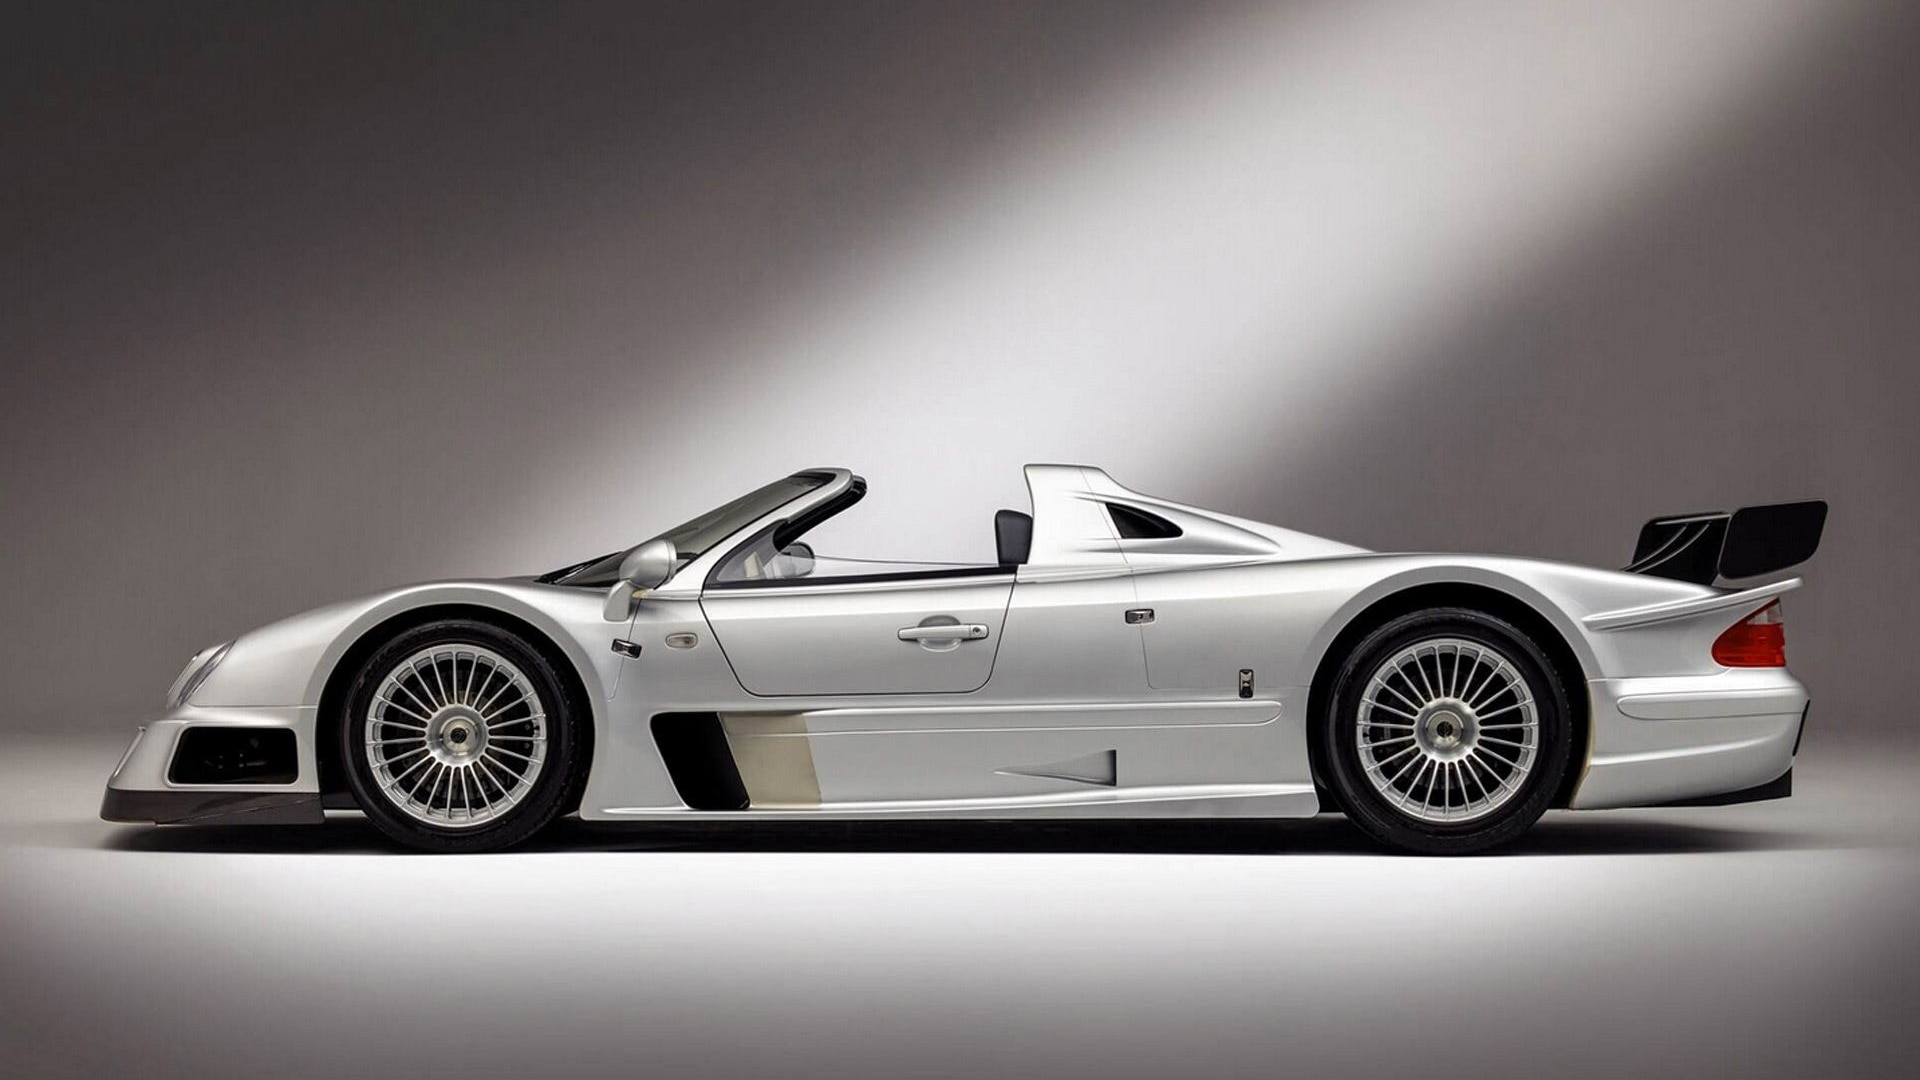 Mercedes CLK GTR Roadster, 1 of 6 cars, sells for over $10M